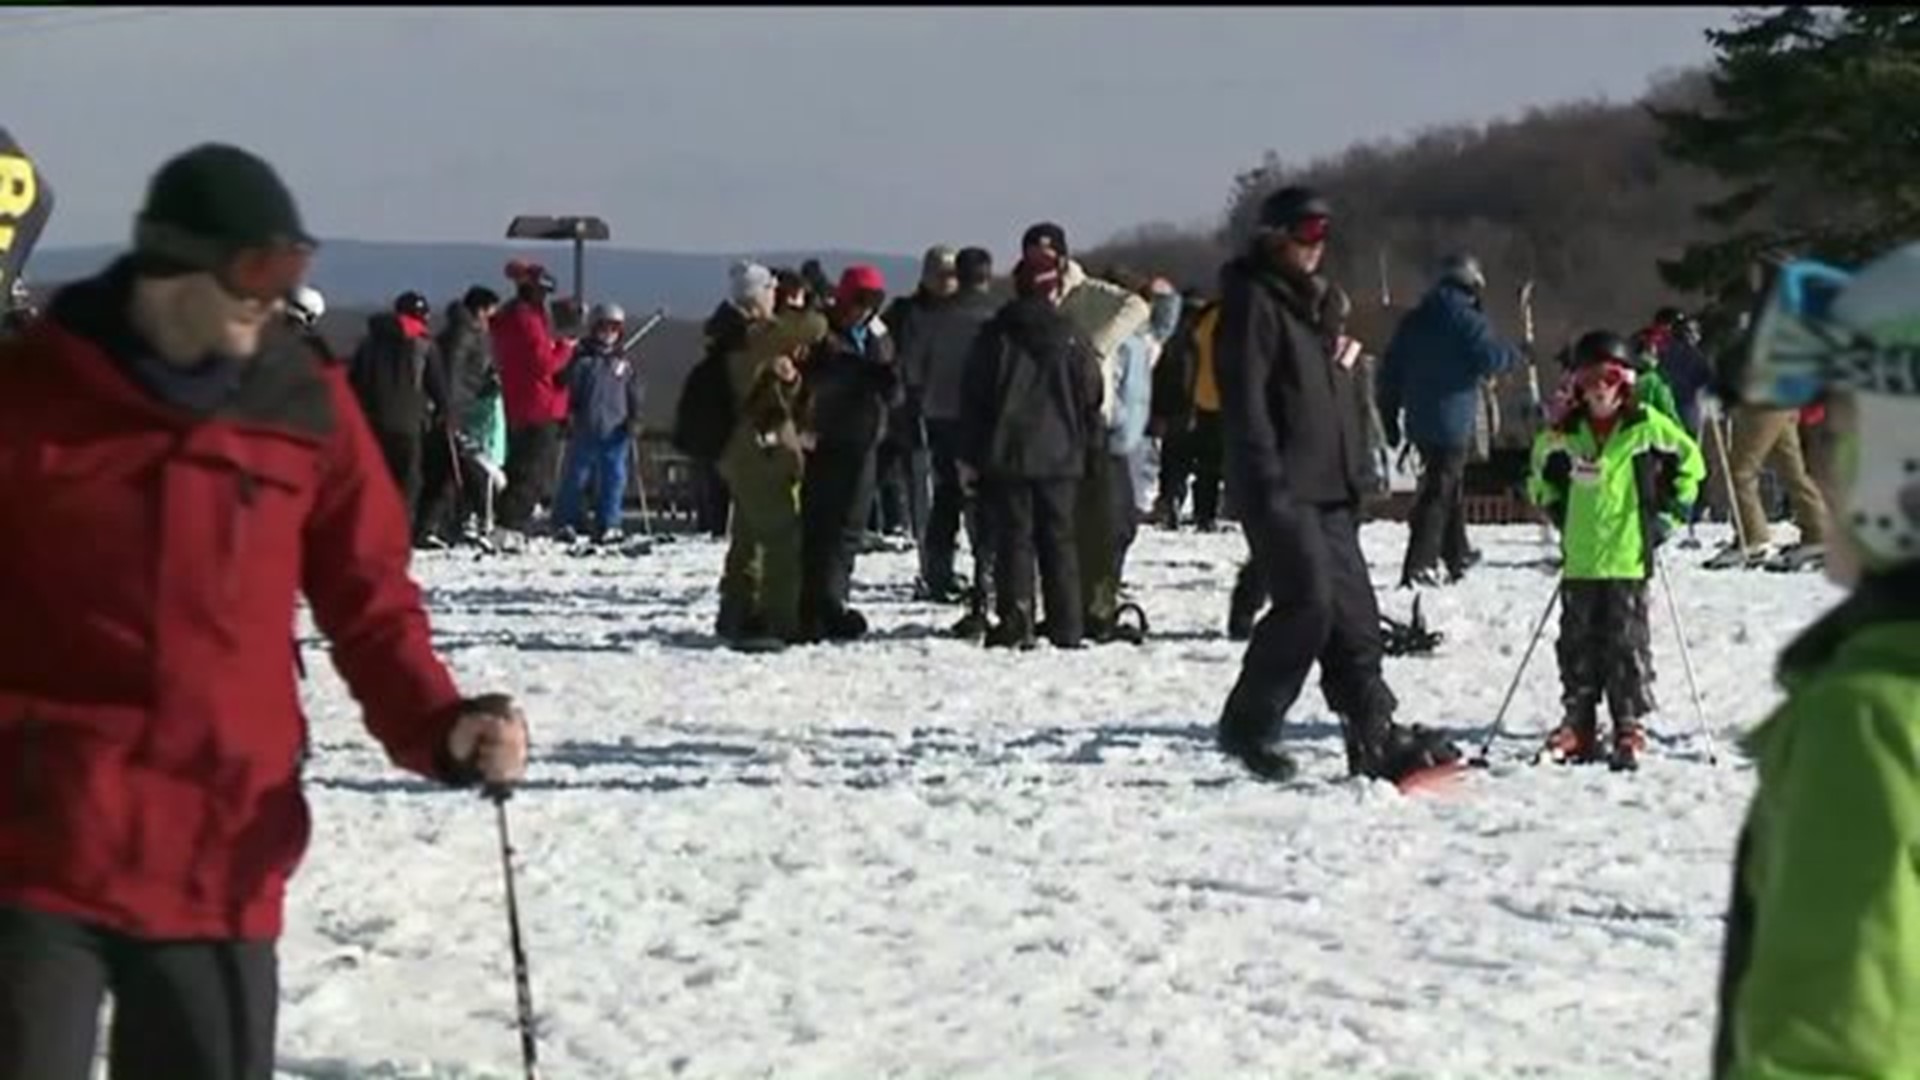 Skiers Embrace Warm Weather on Slopes